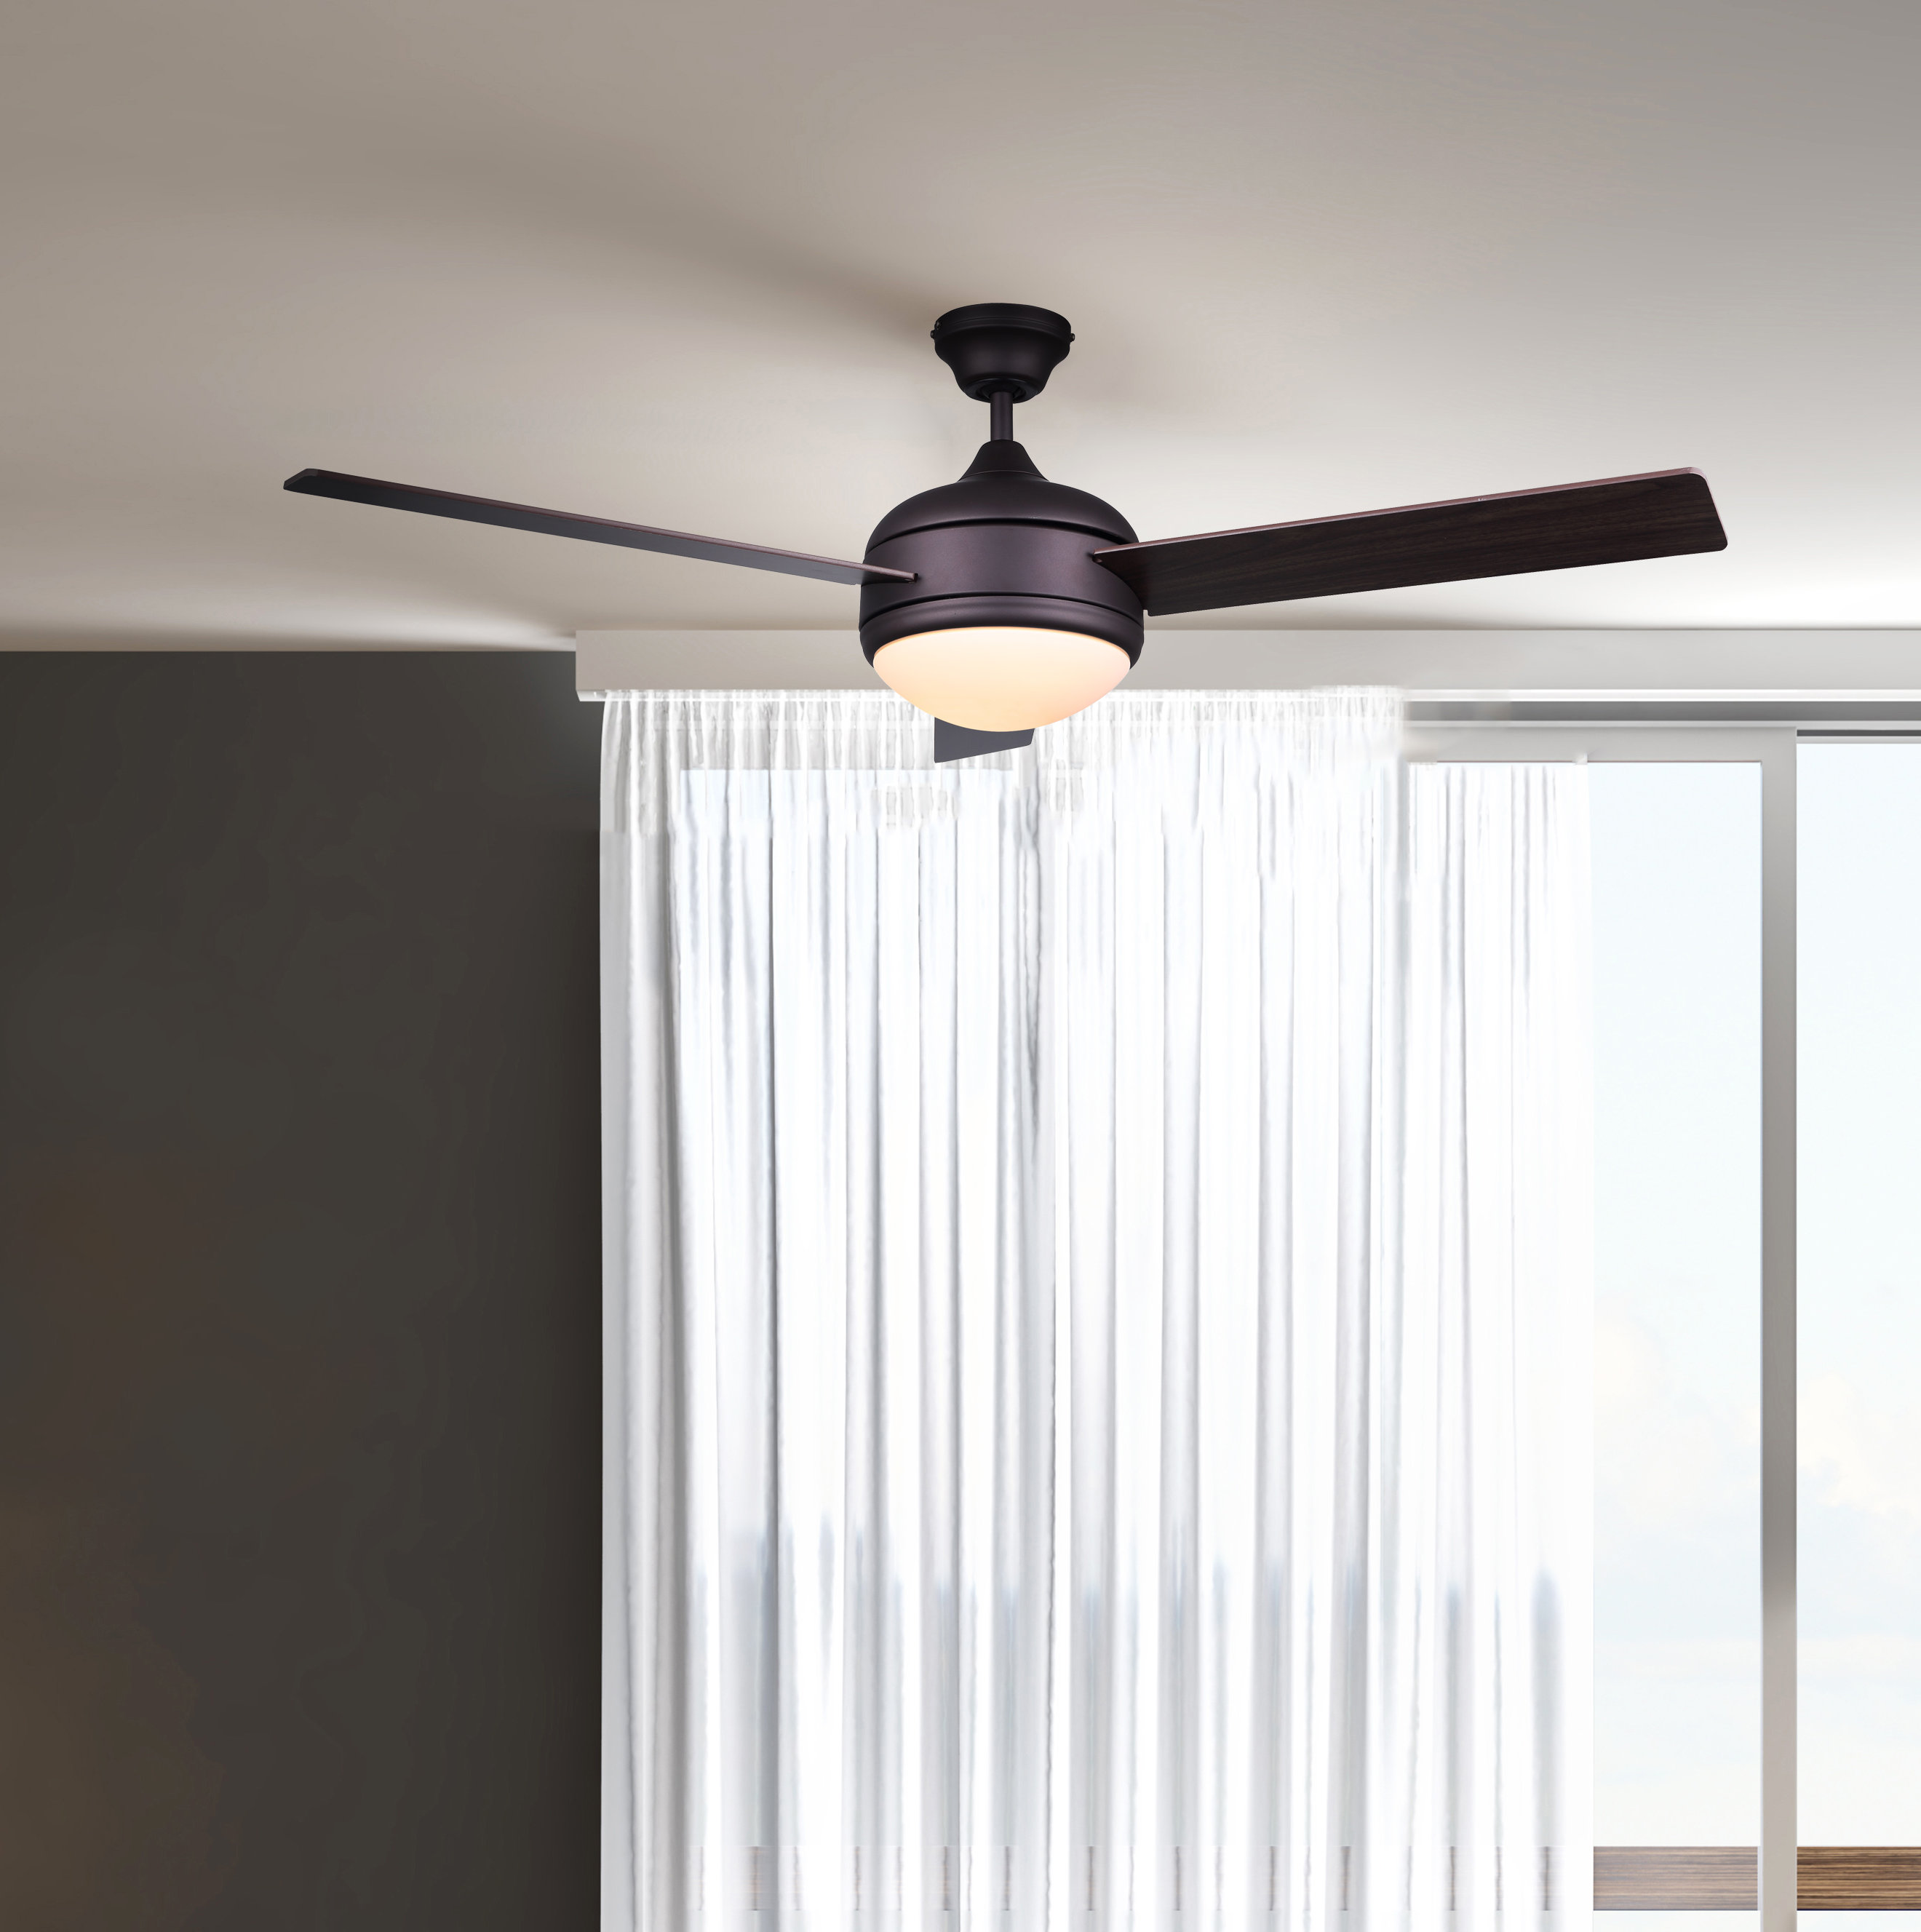 48" 5 Blades Ceiling Fan with Light Kit Downrod Copper Reversible Remote Control 